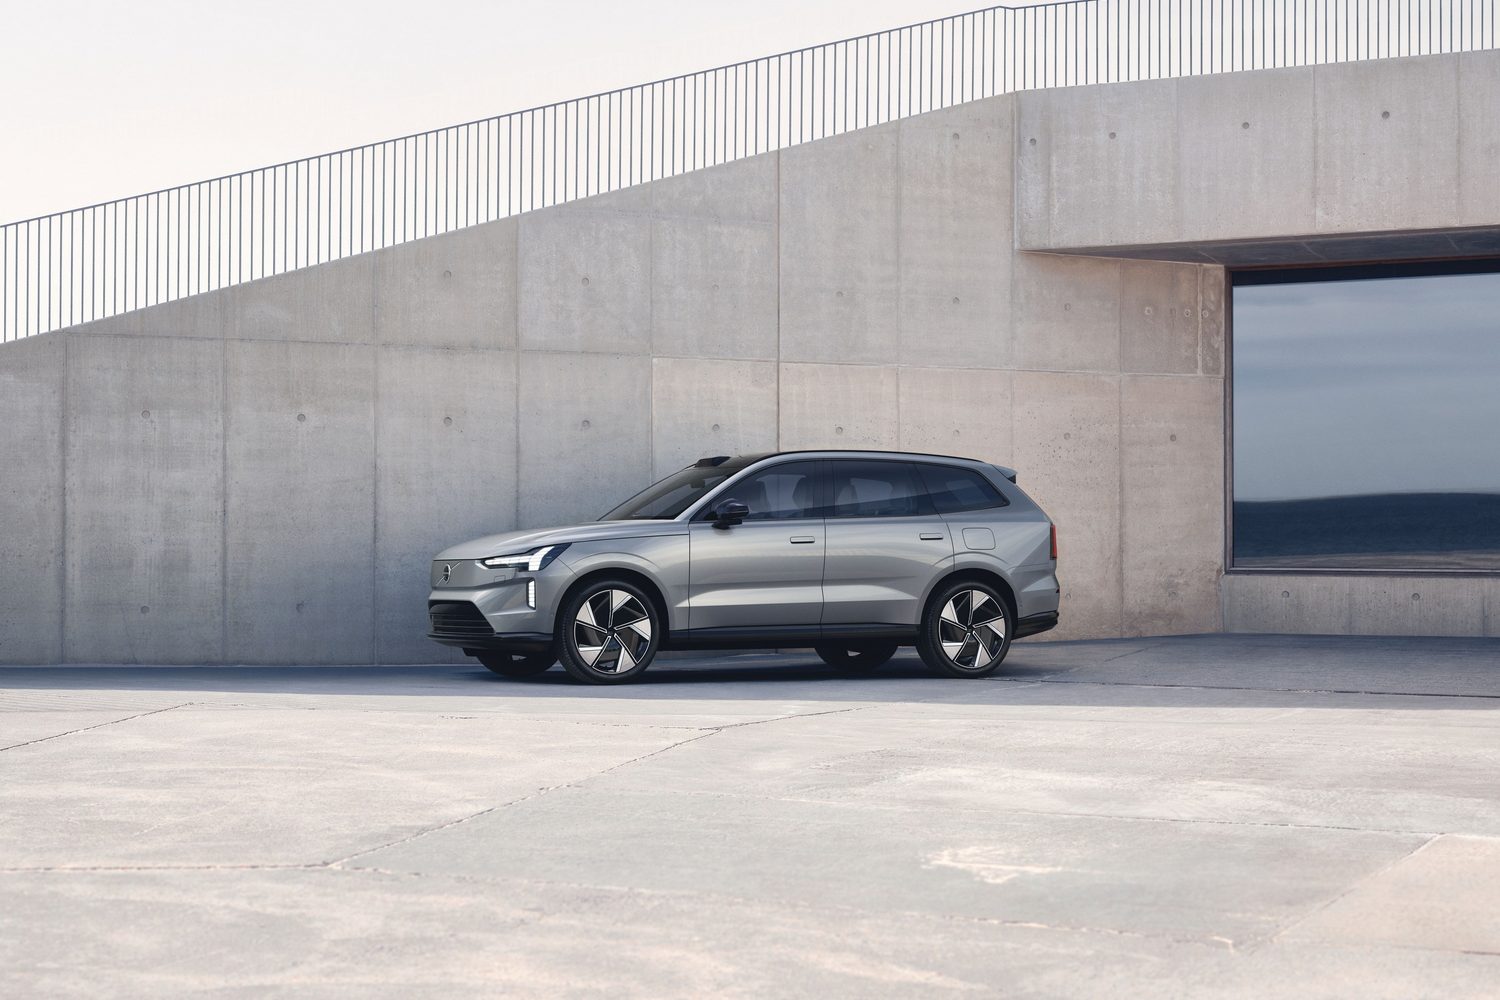 Volvo unveils new EX90 SUV and plans for a new EV every year until 2030. Image by Volvo.